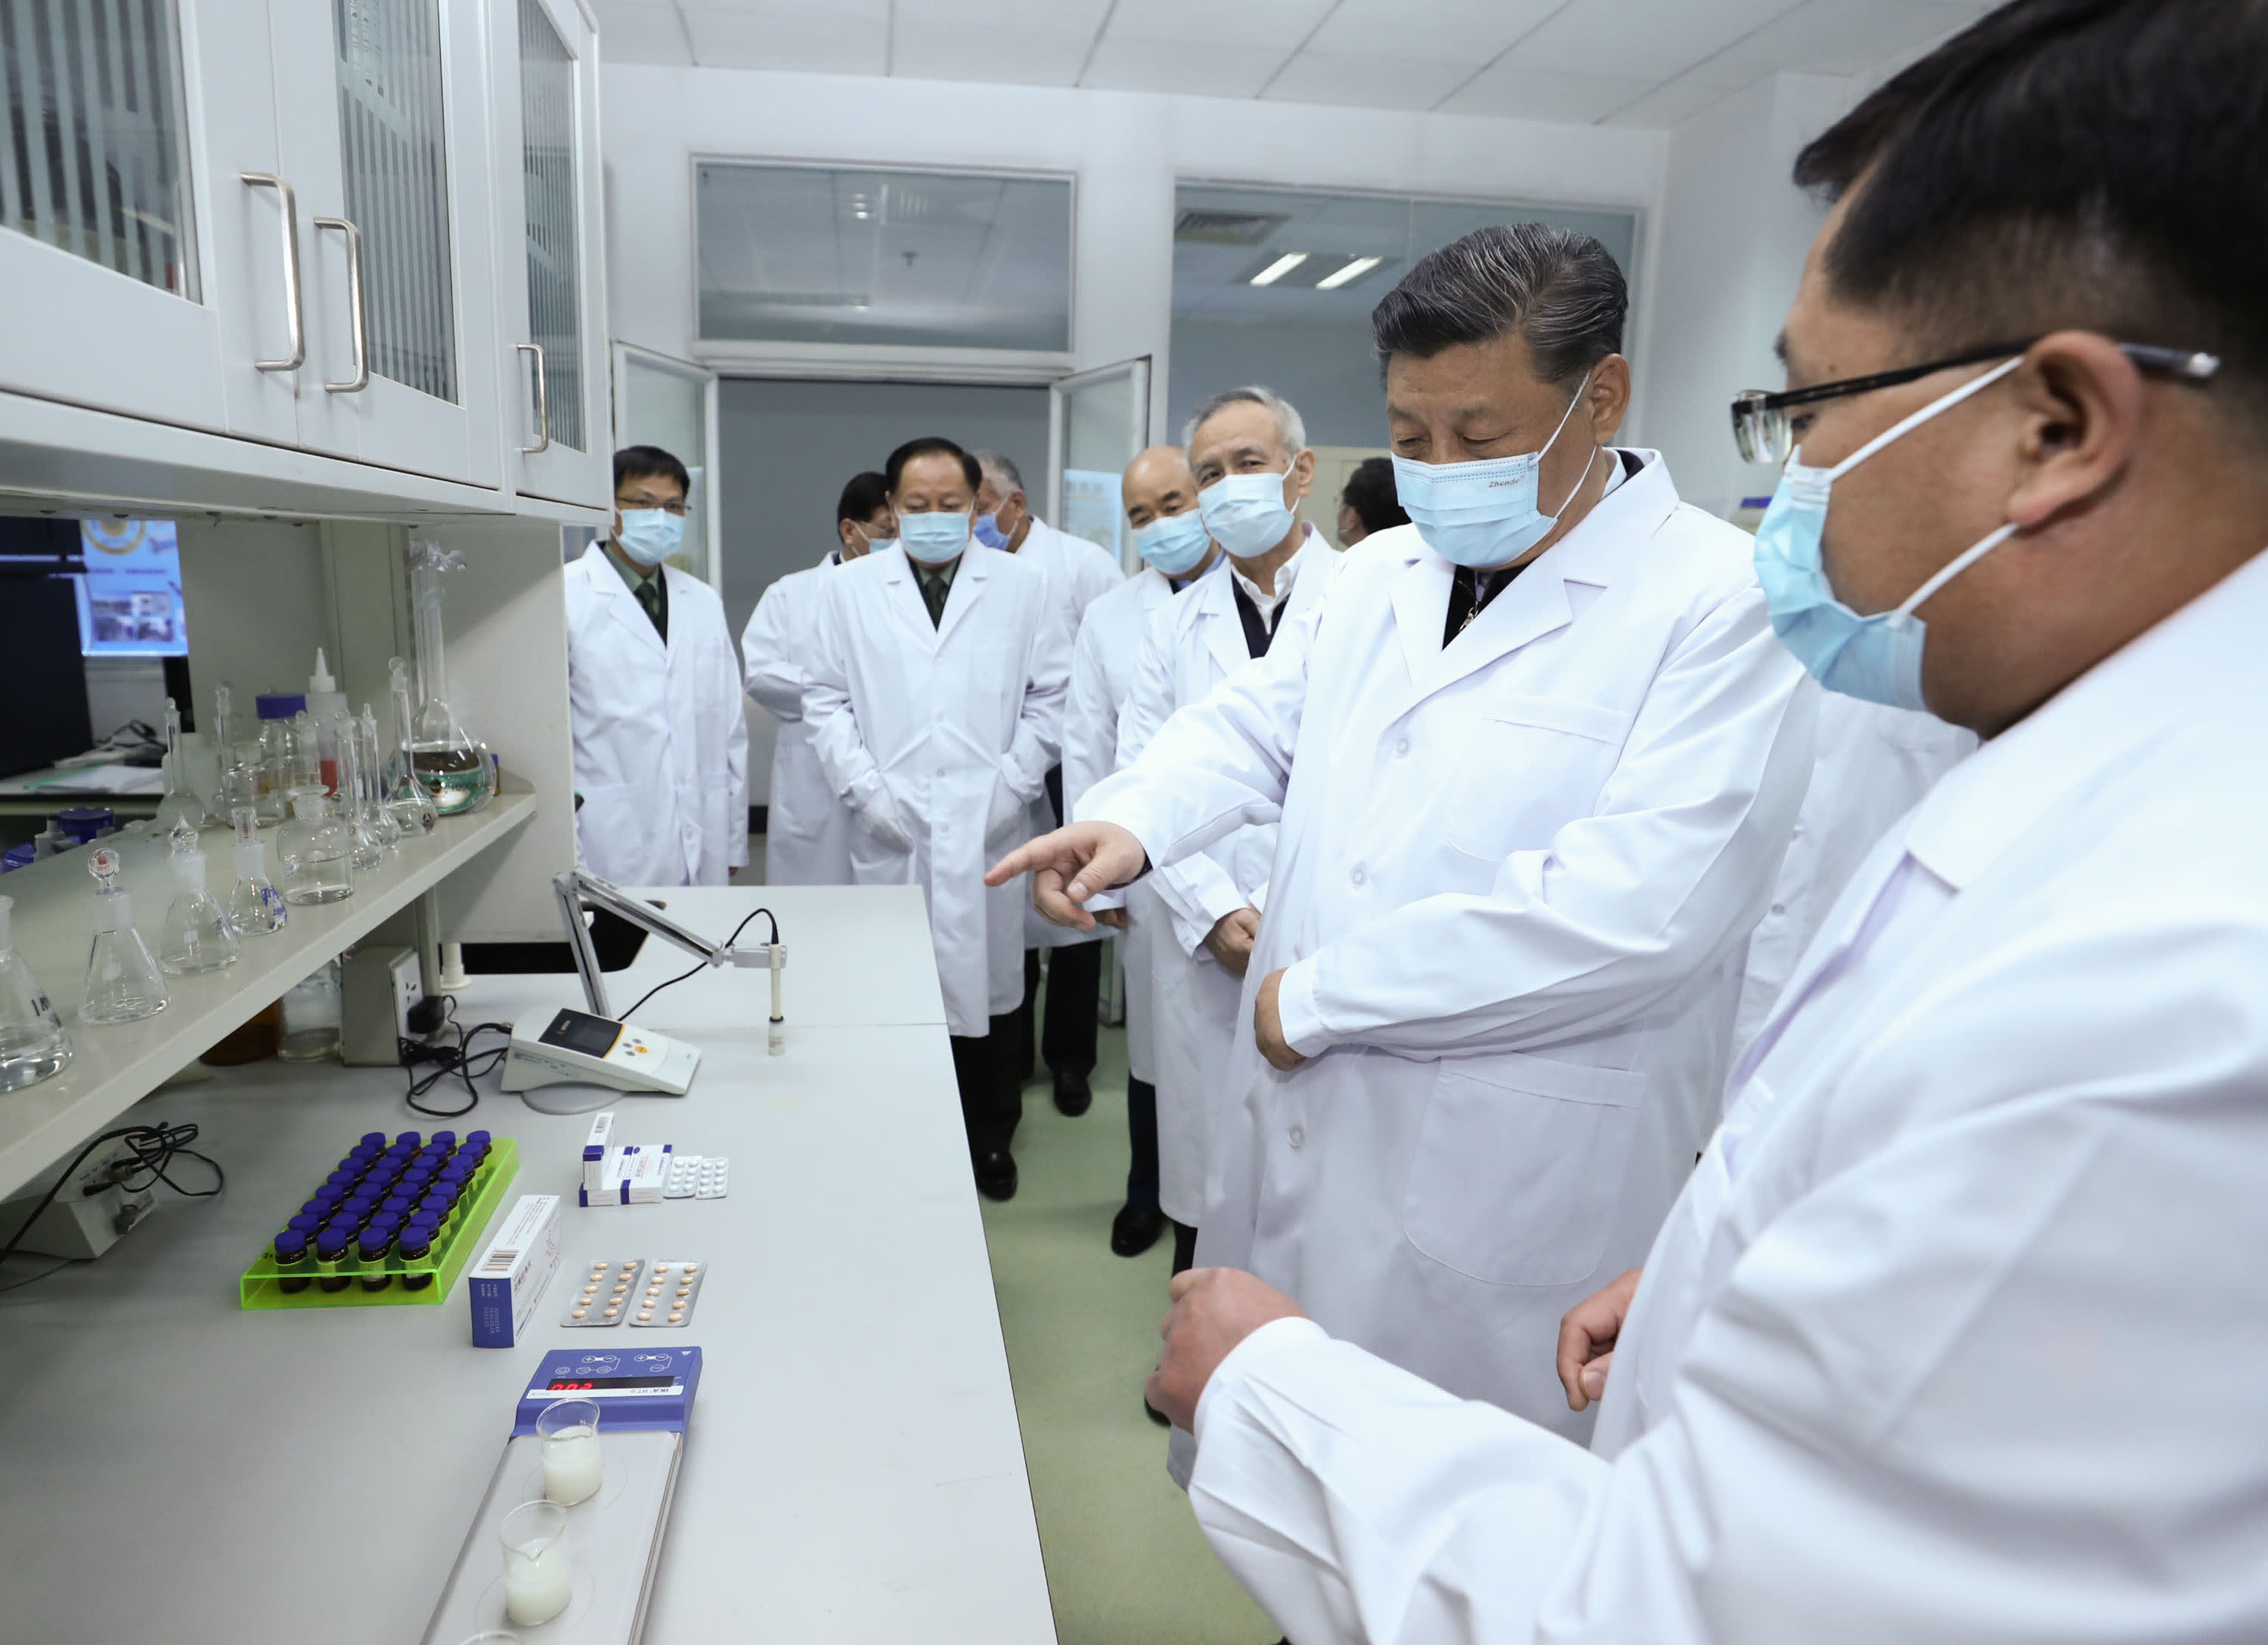 China’s vaccines are ready to fill the gap, but they are facing confidence issues